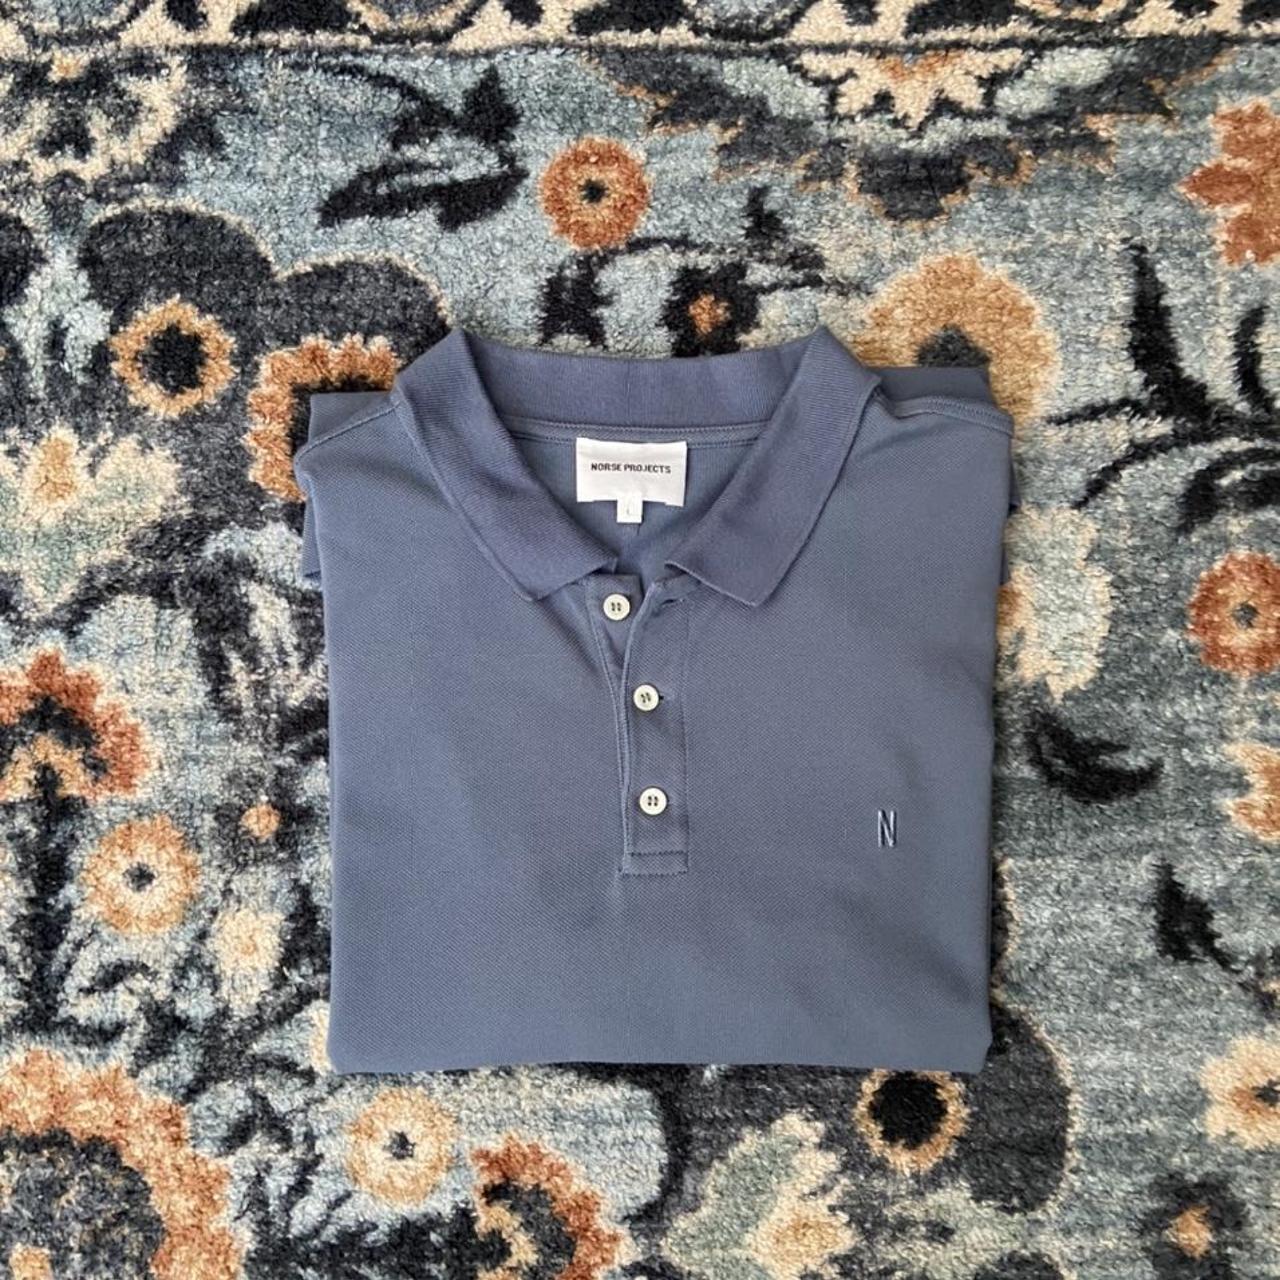 Product Image 1 - Norse Projects Scoria Blue Polo
Size: